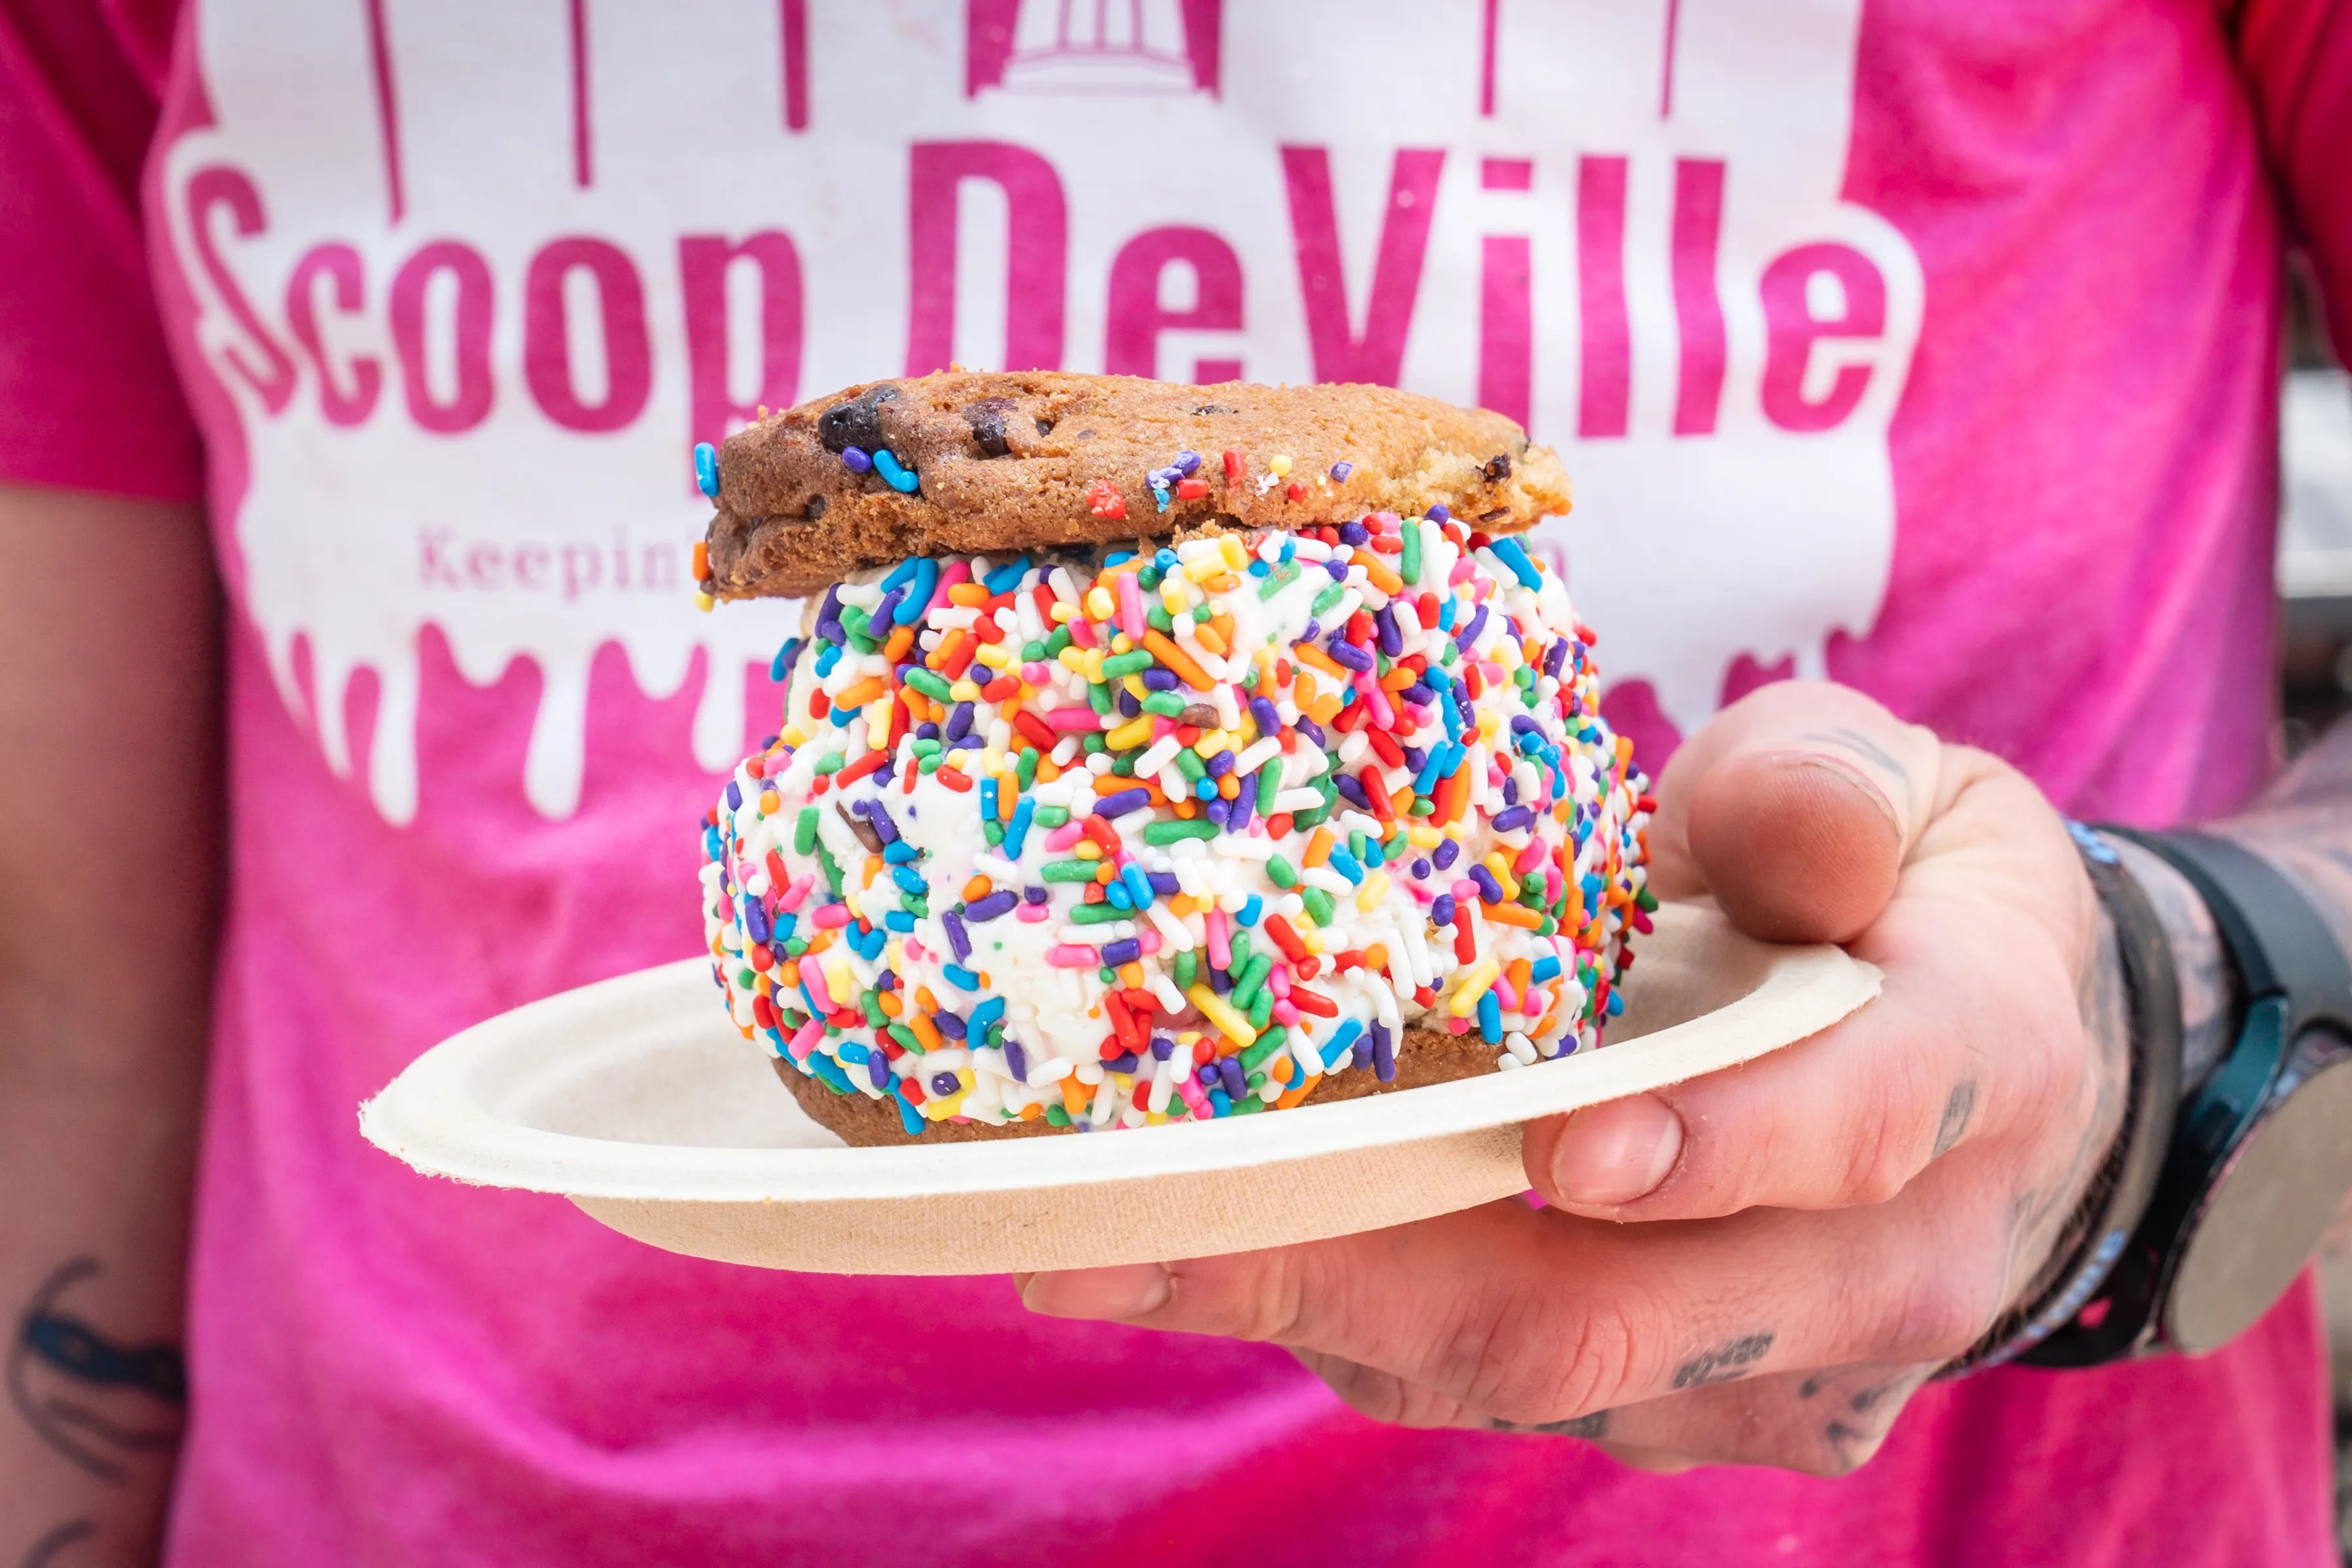 An ice cream sandwich at Scoop DeVille at the Walnut Street shop, in Philadelphia, Wednesday, May 31, 2023.